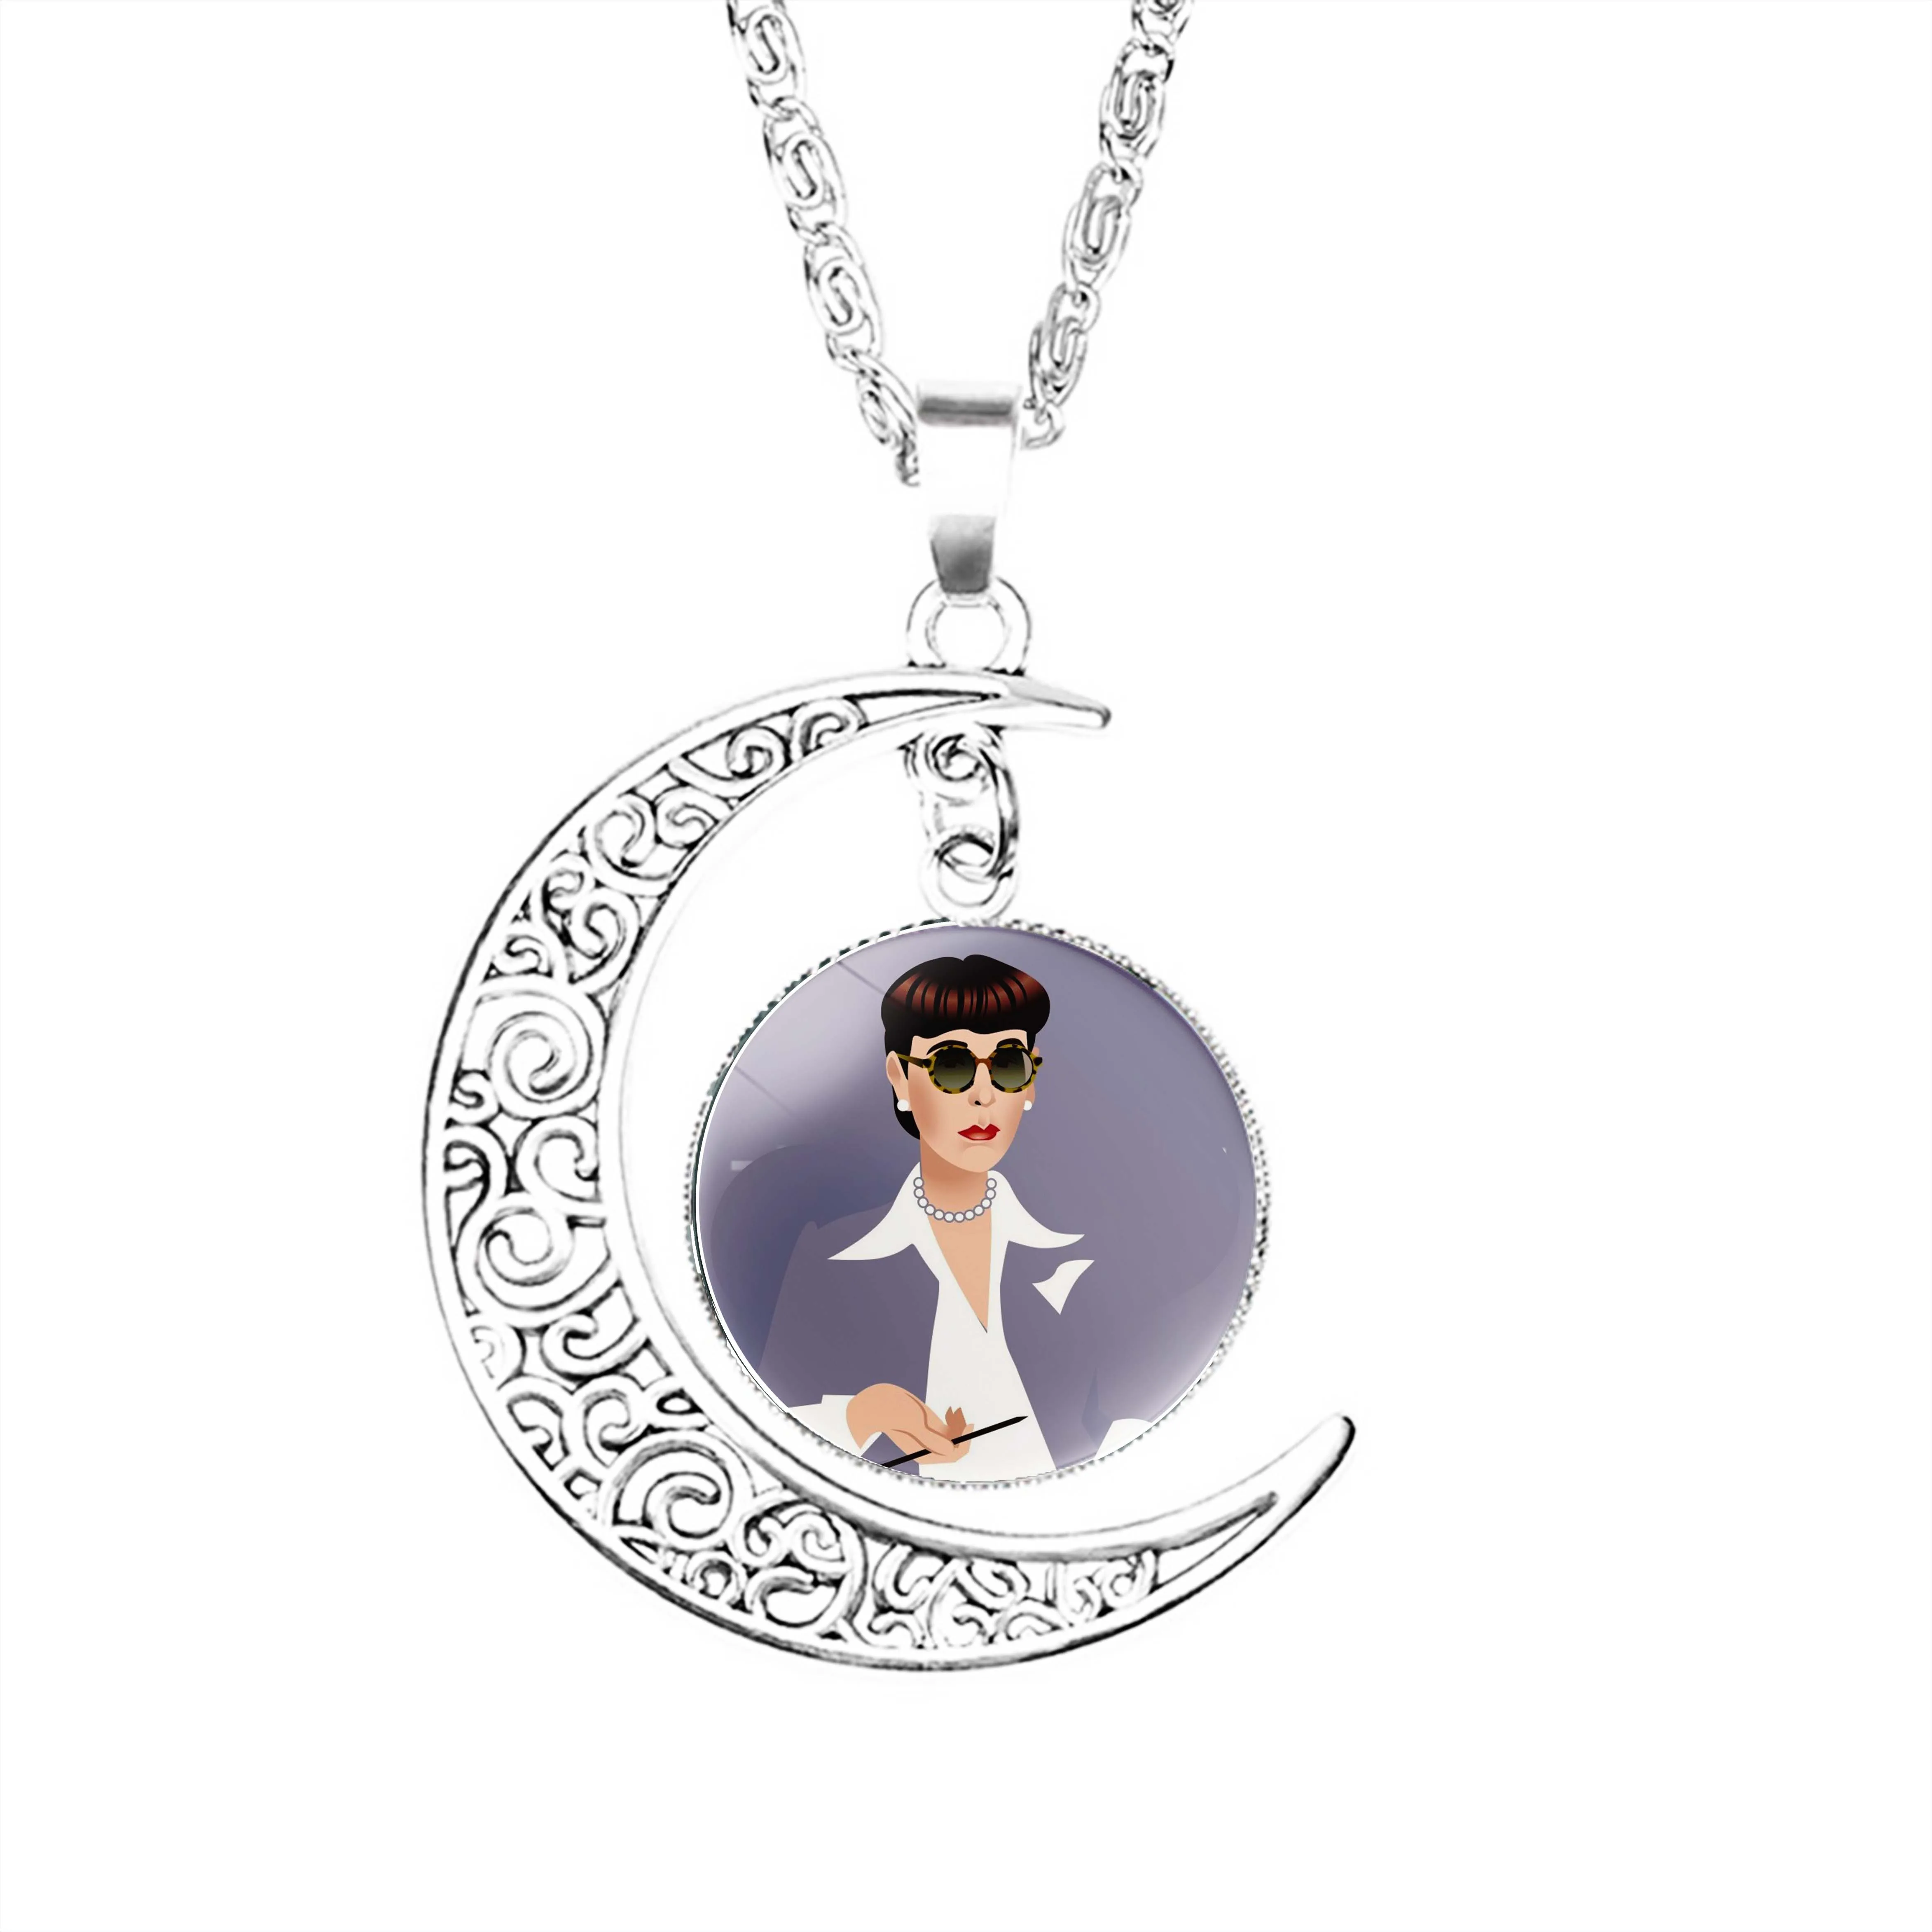 

Edith Head Moon Necklace Girls Pendant Jewelry Glass Charm Chain Gifts Lady Lovers Men Stainless Steel Boy Crescent Women